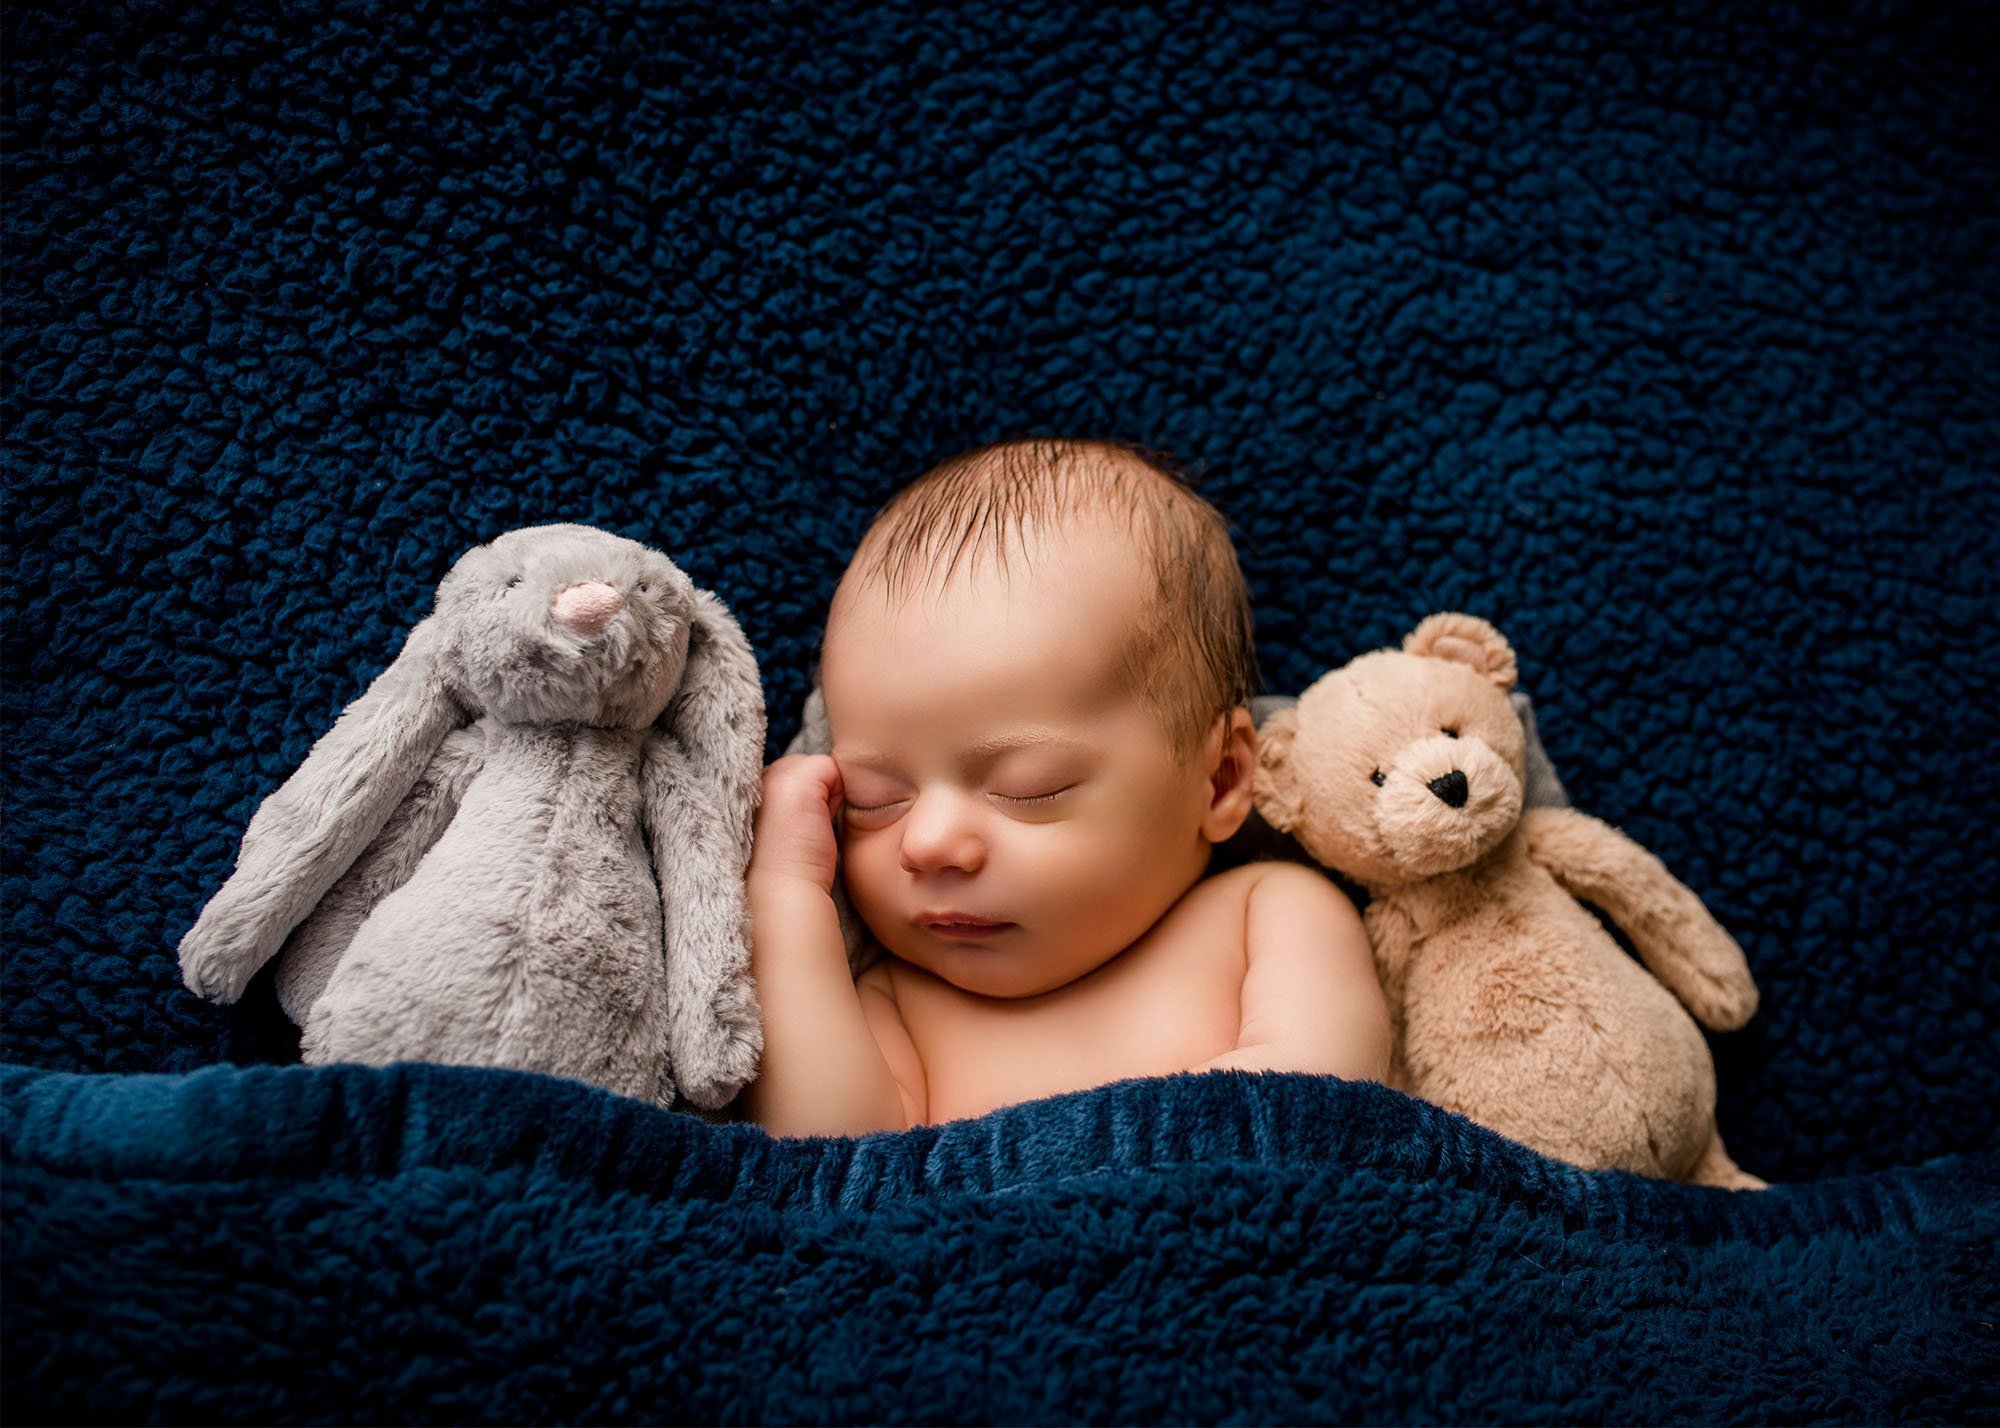 Newborn baby sleeping in blue blanket with his teddy and rabbit